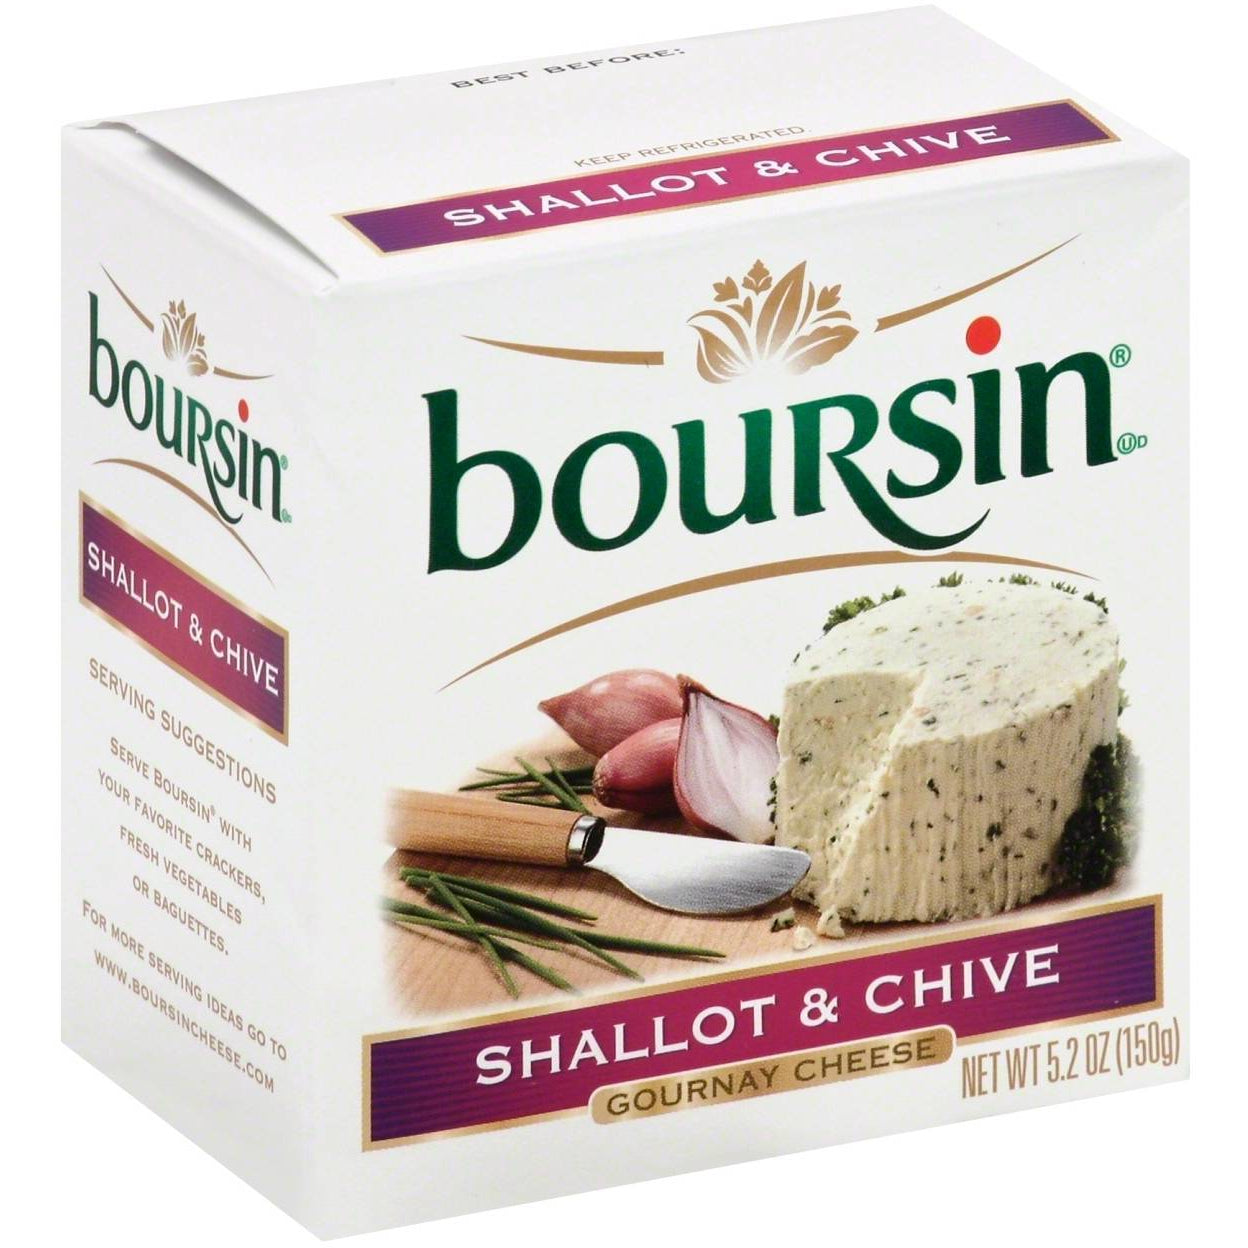 Boursin Shallot & Chive Gournay Cheese, 5.2 Oz